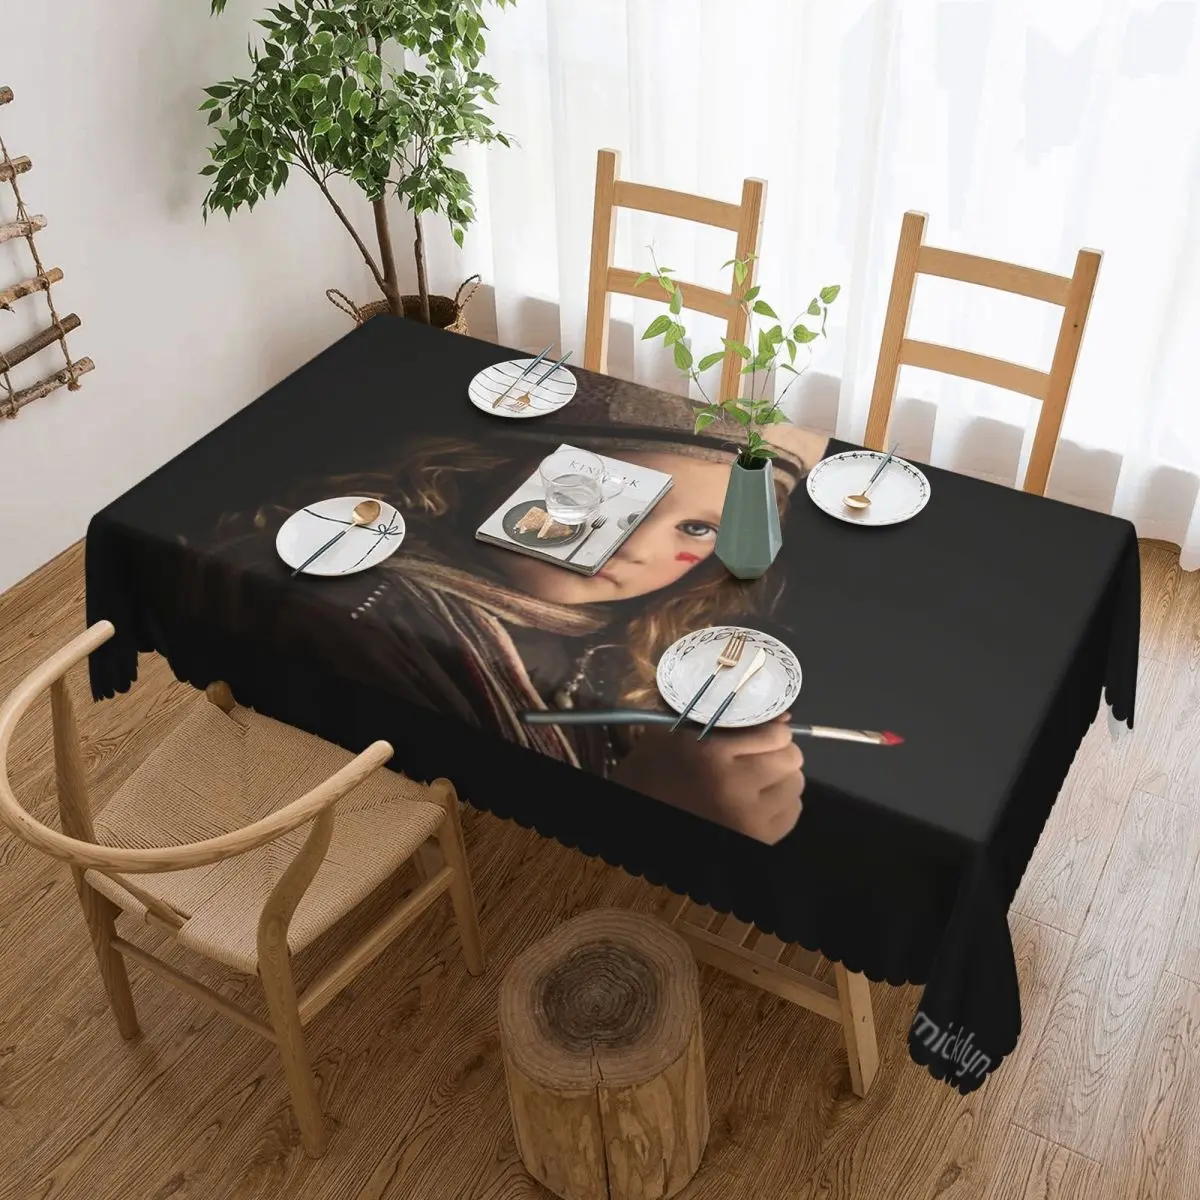 

Can I Finish My Painting Now Tablecloth 54x72in wrinkle resistant Home Decor Festive Decor